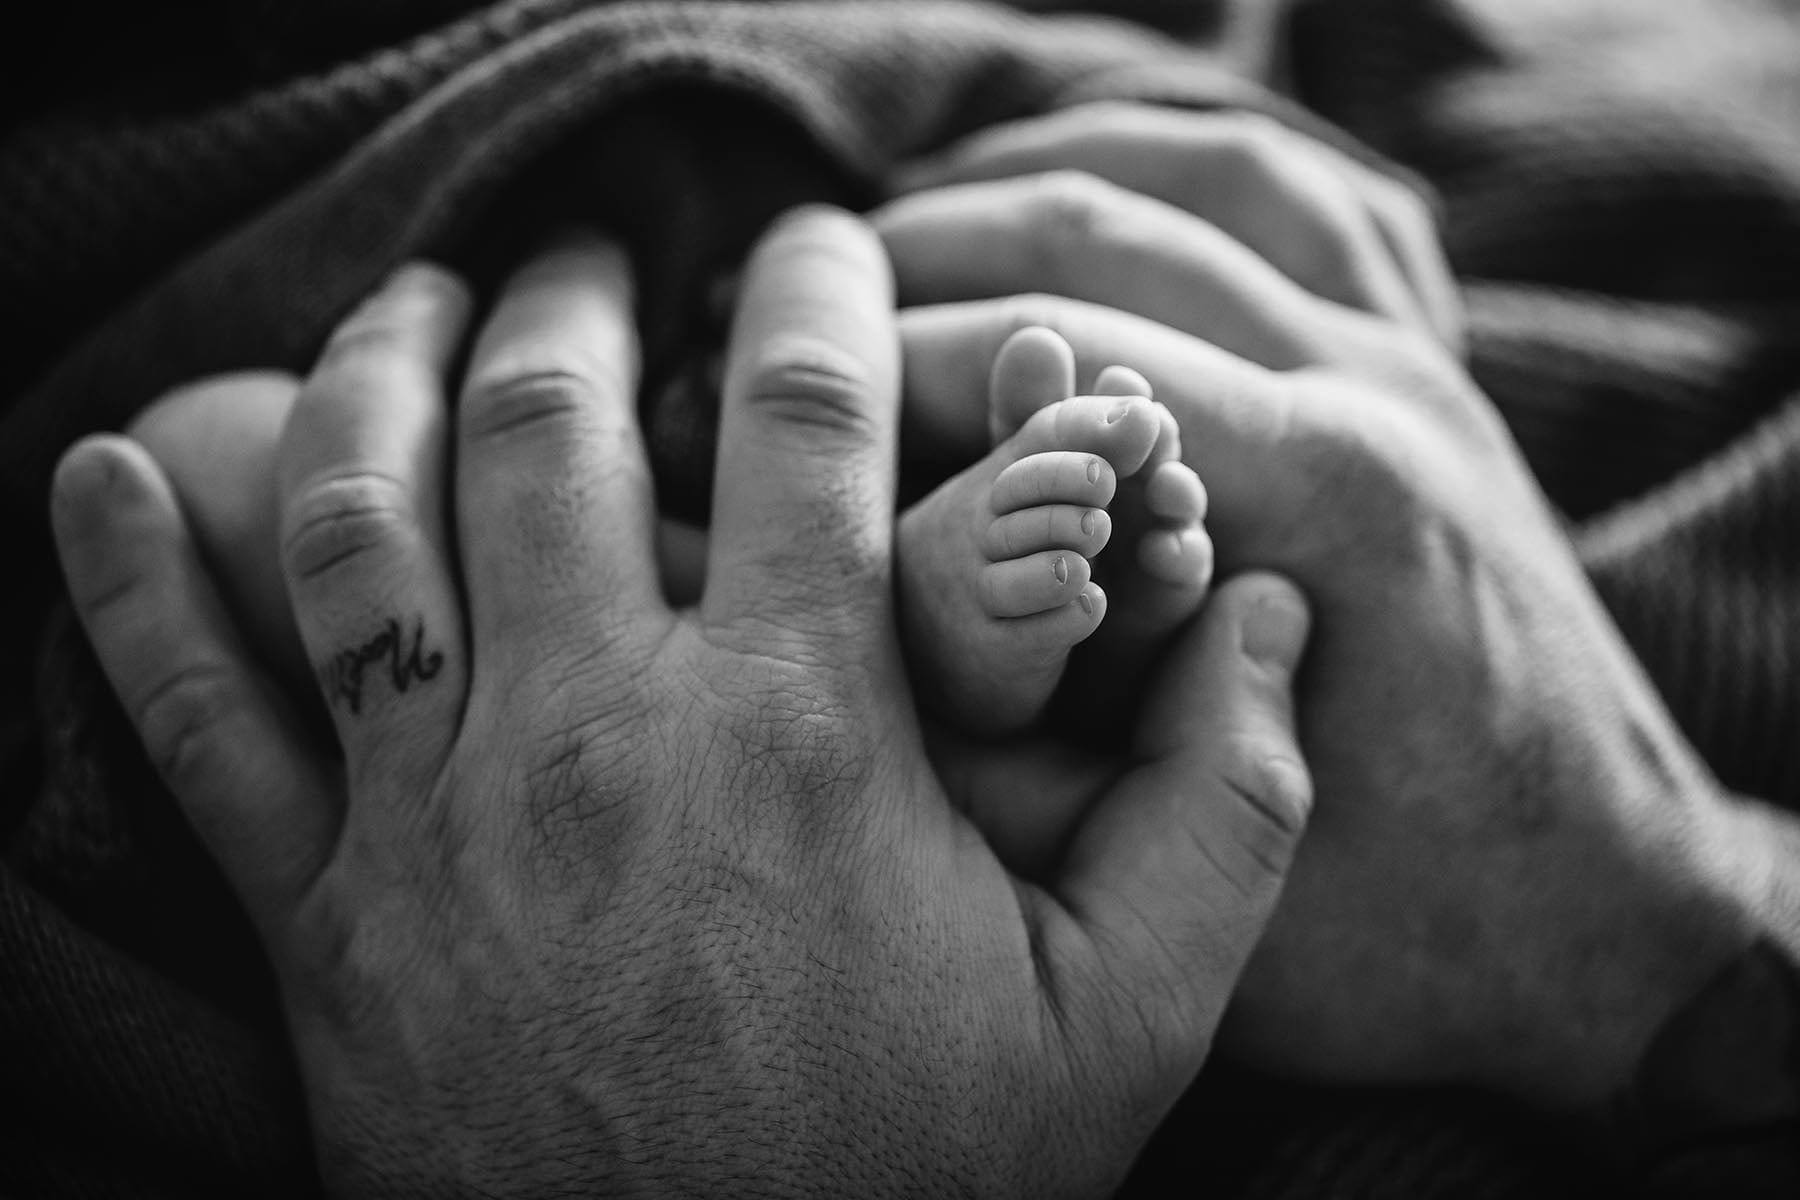 Black and white photograph showing the contrast between dads rough hands and soft newborn feet